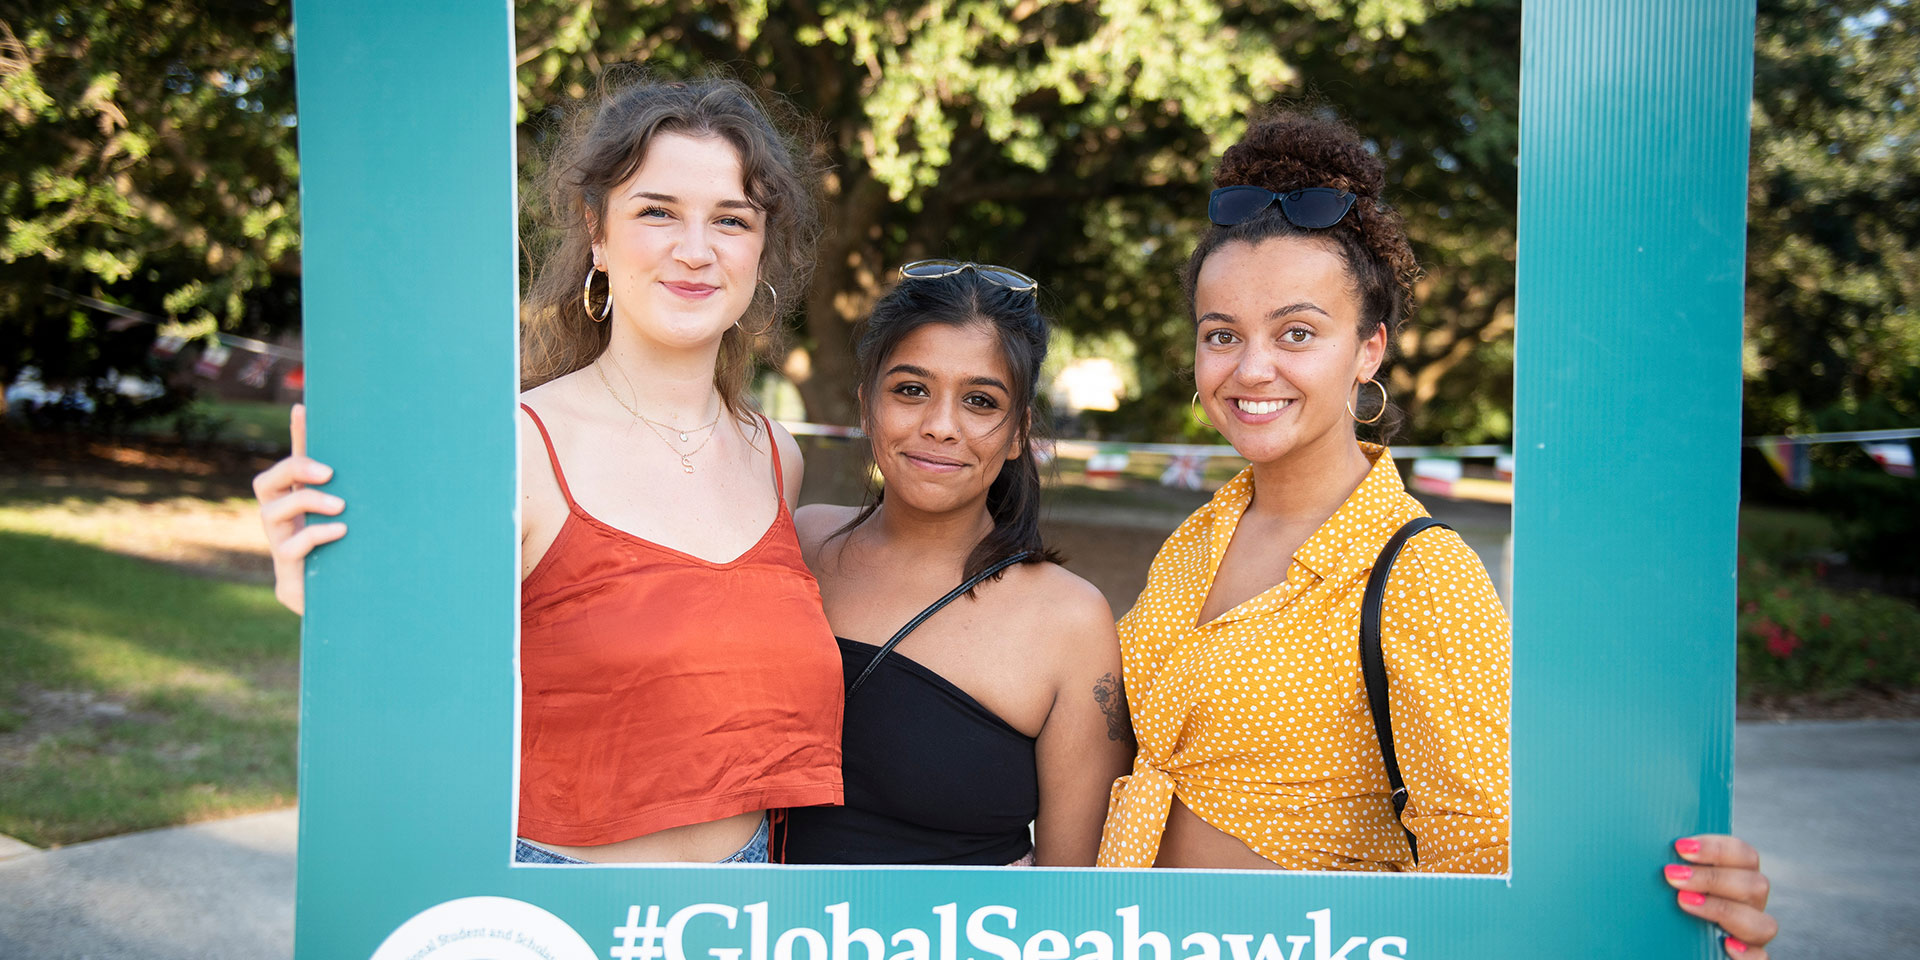 Three students hold a sign framing their faces that says #GlobalSeahawks